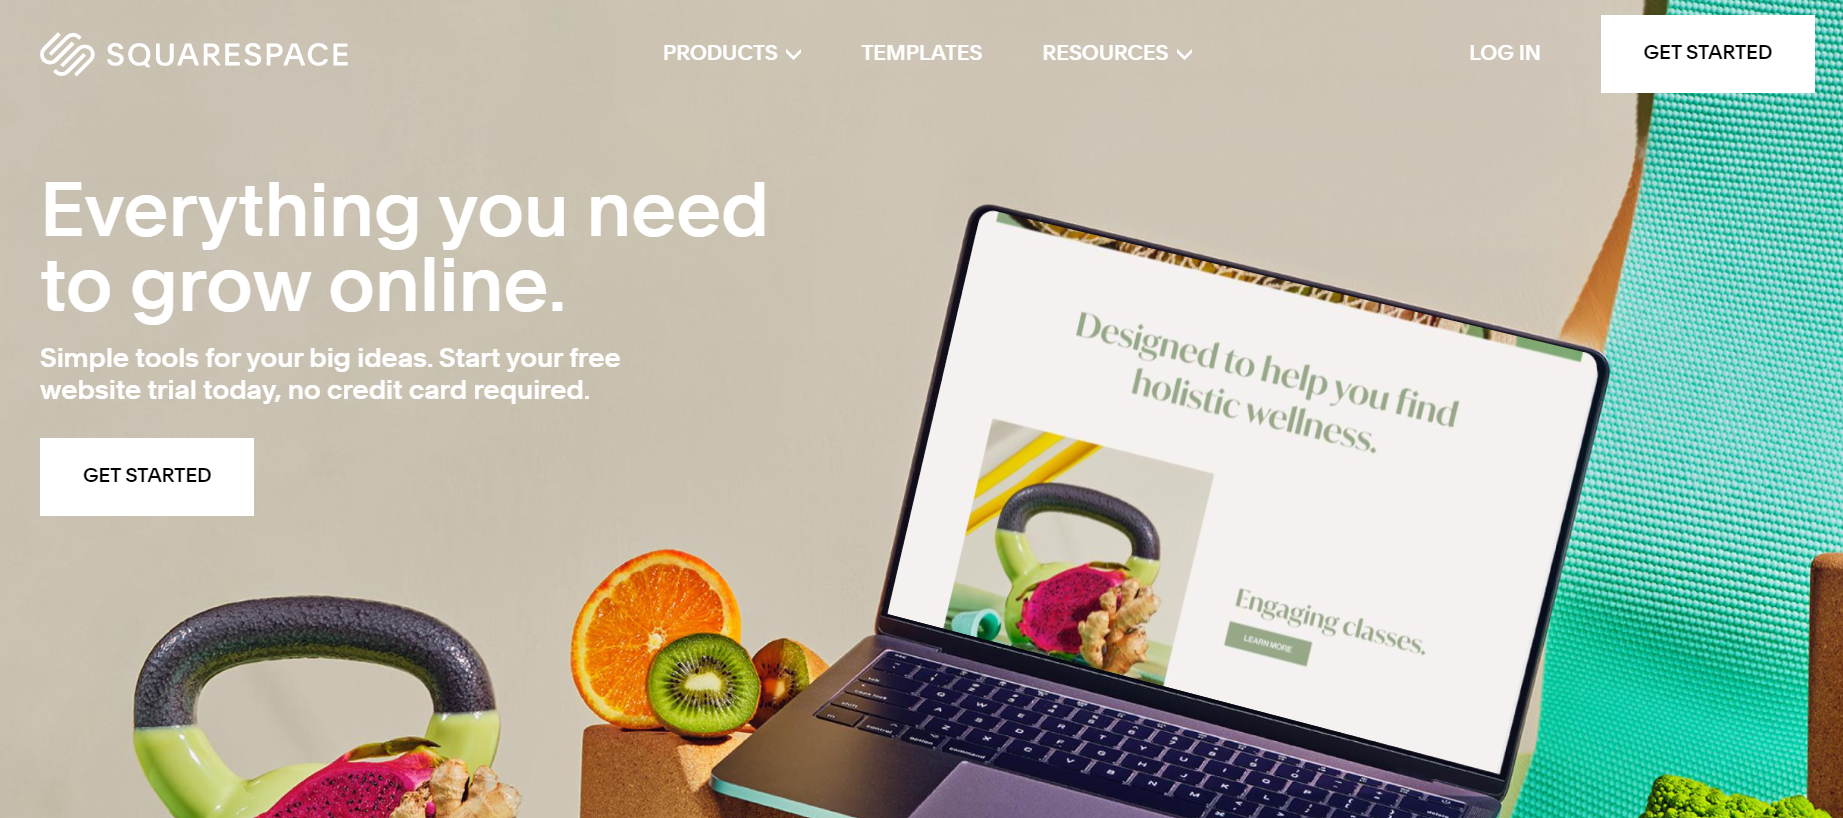 Squarespace is a highly preferred ecommerce website builder.